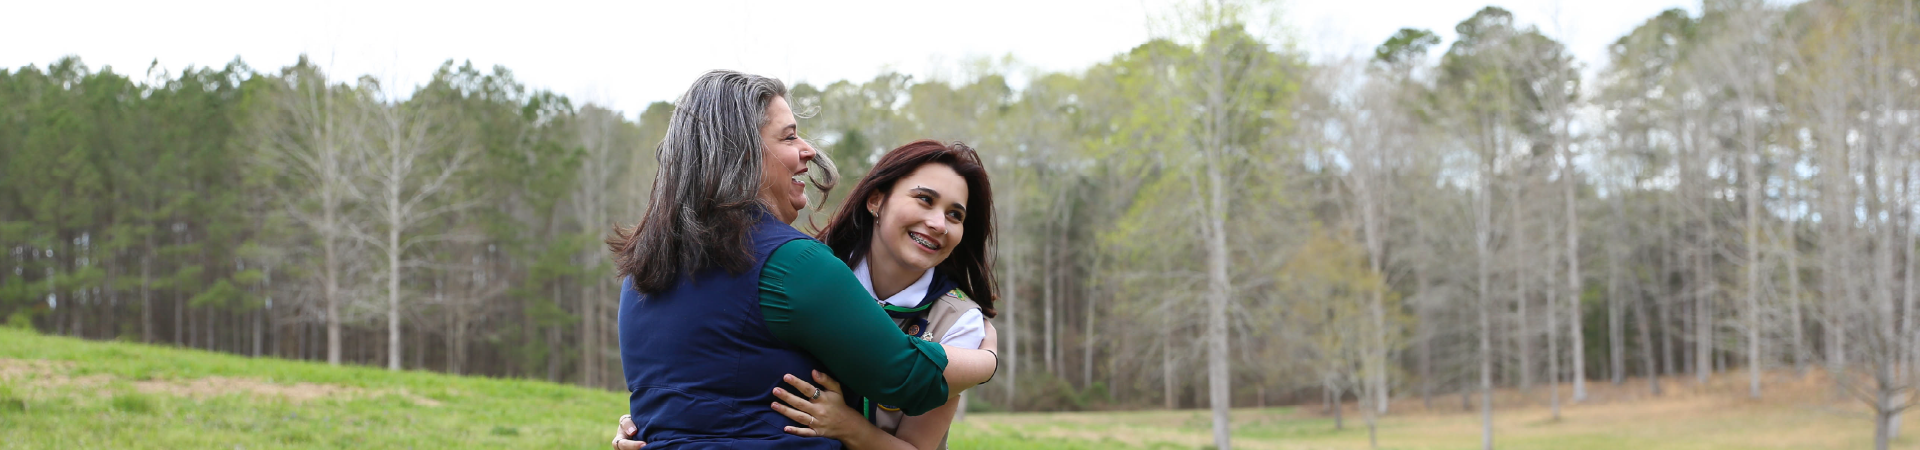  co-leader mom jokes around with Girl Scout daughter outdoors 